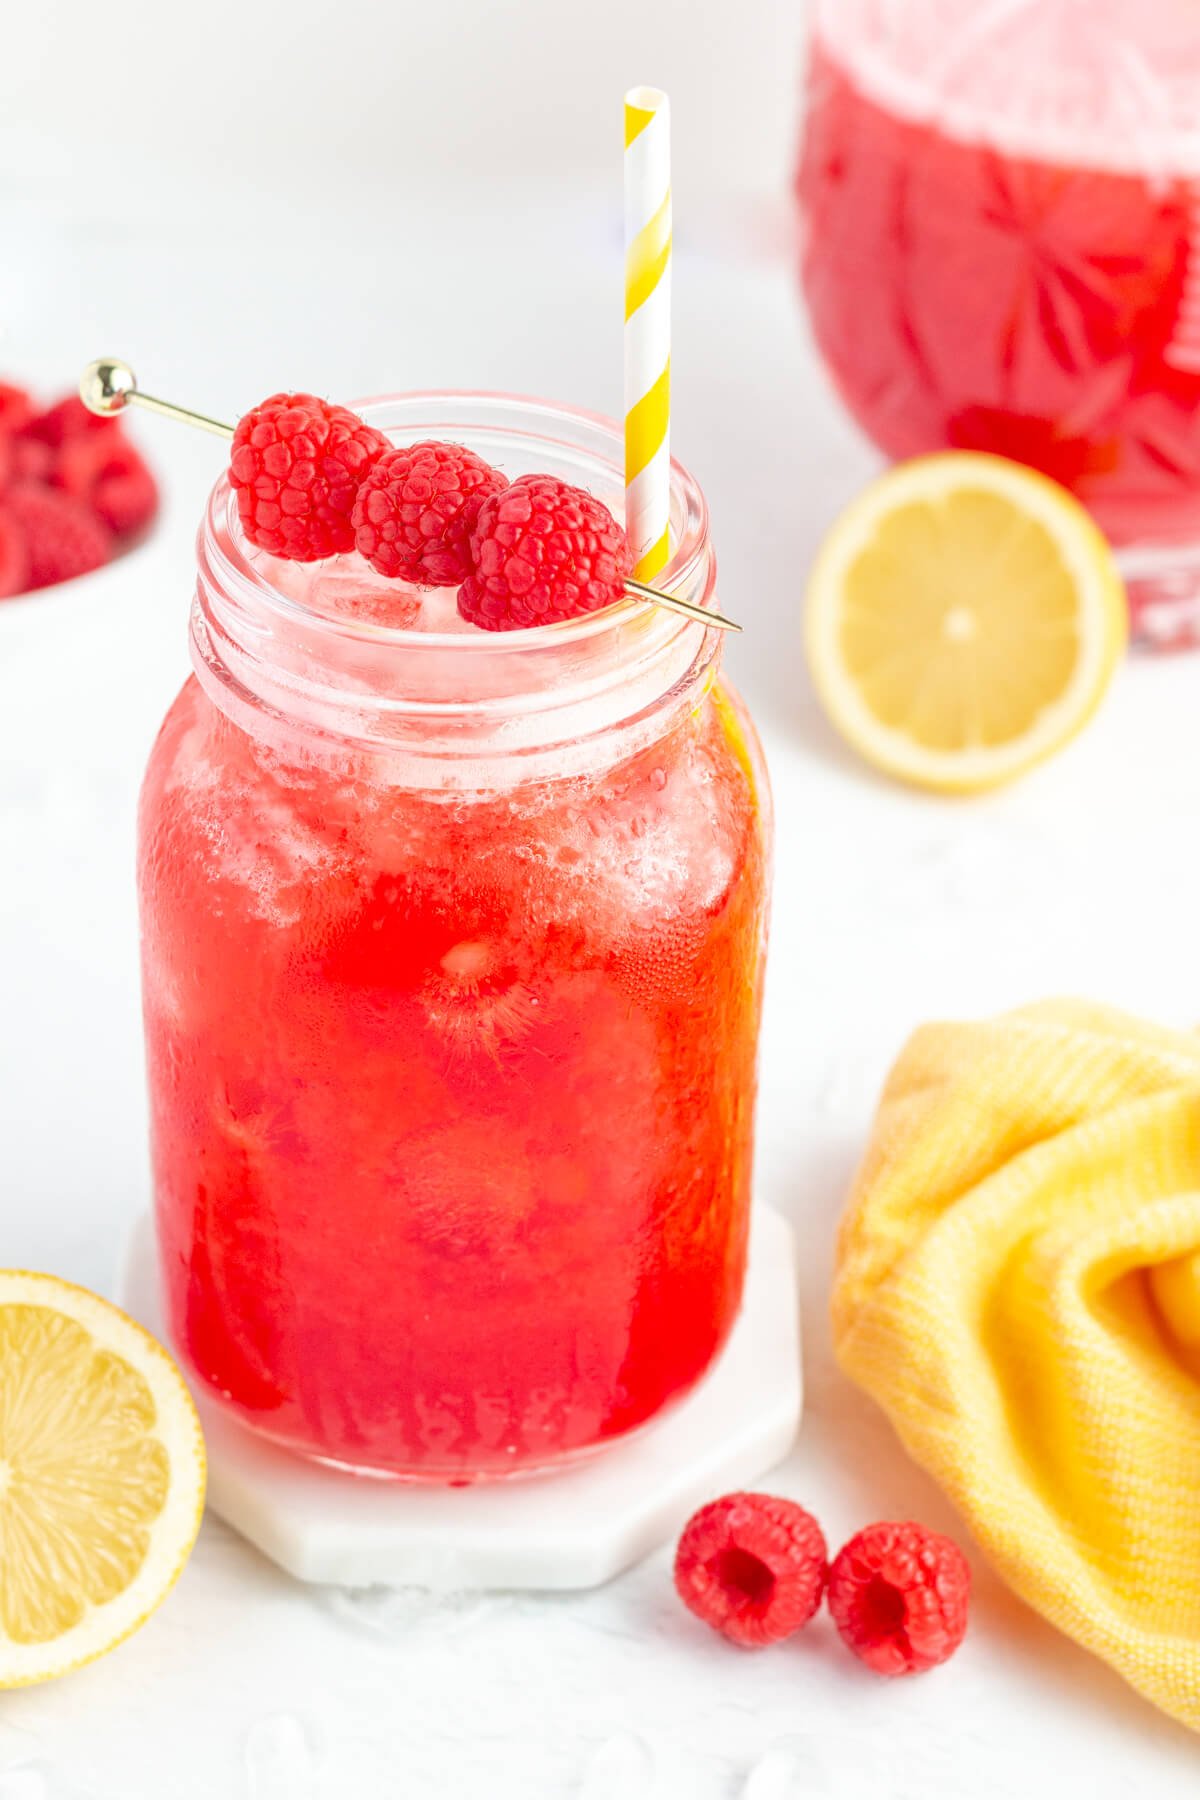 mason jar filled with raspberry lemonade garnished with 3 ripe raspberries with a white and yellow striped straw.